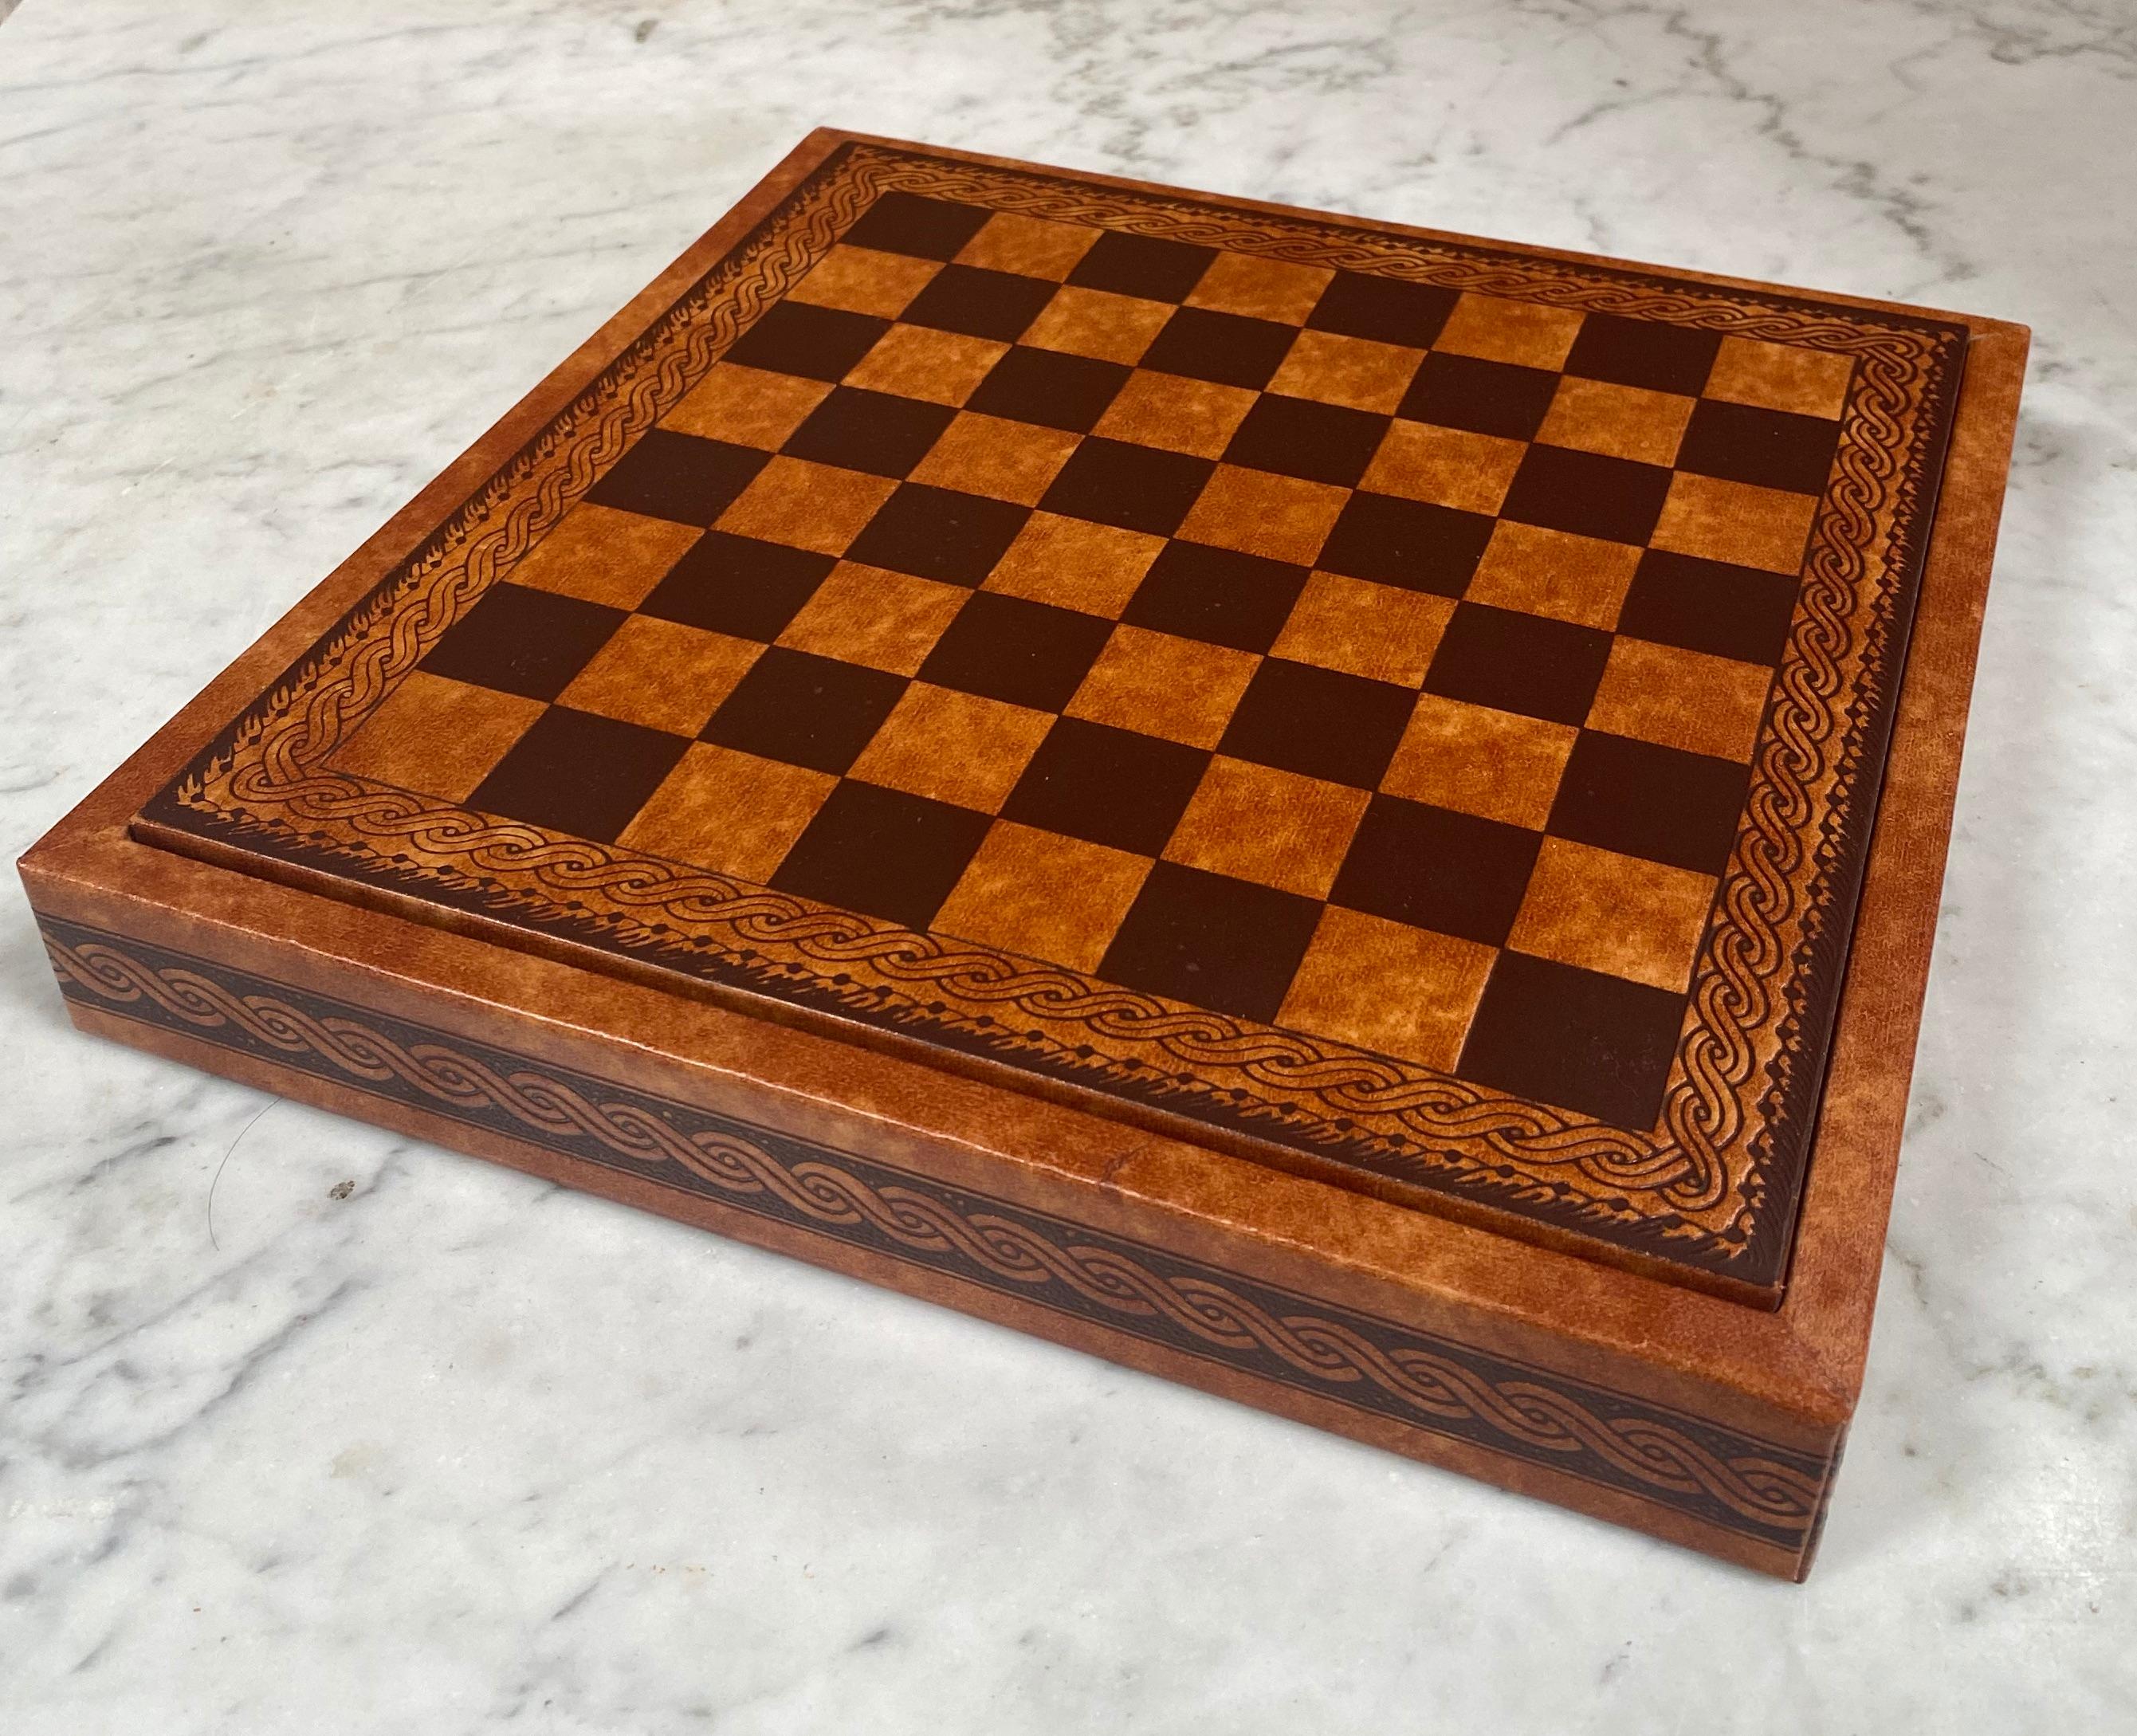 Beautiful Small Italian chess set in leather and wood with all the pawns.